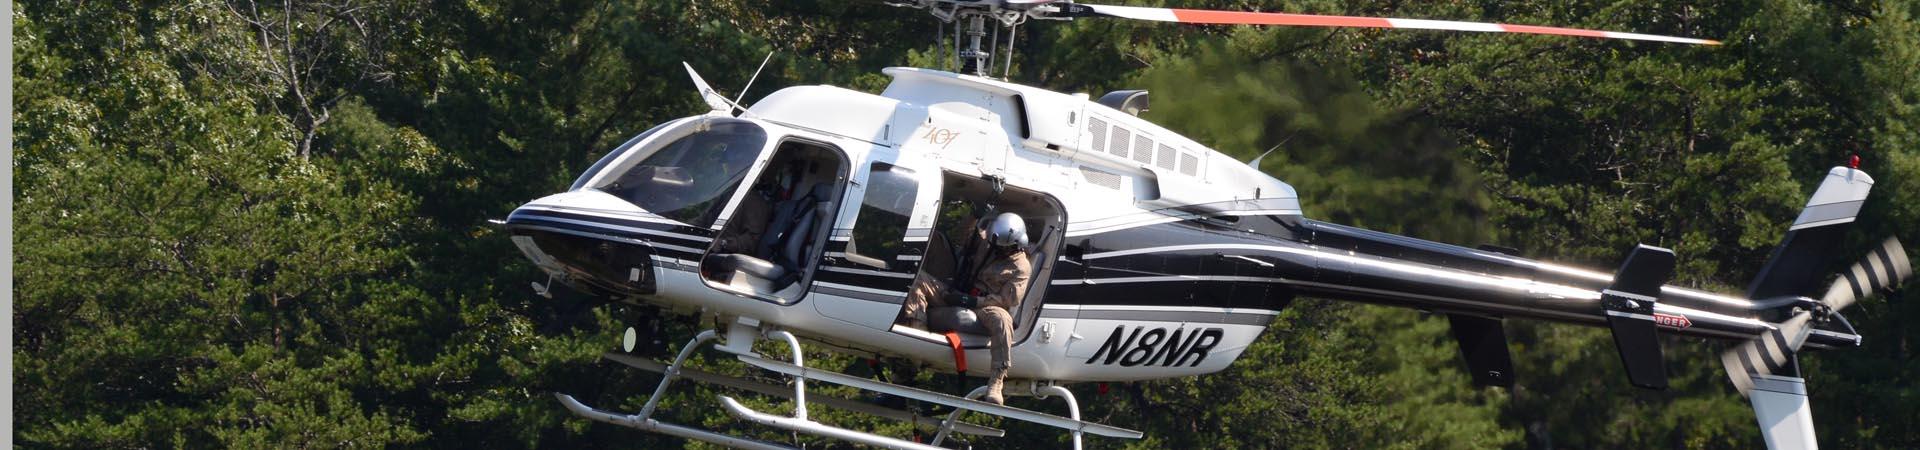 DNR helicopter in long-line rescue training